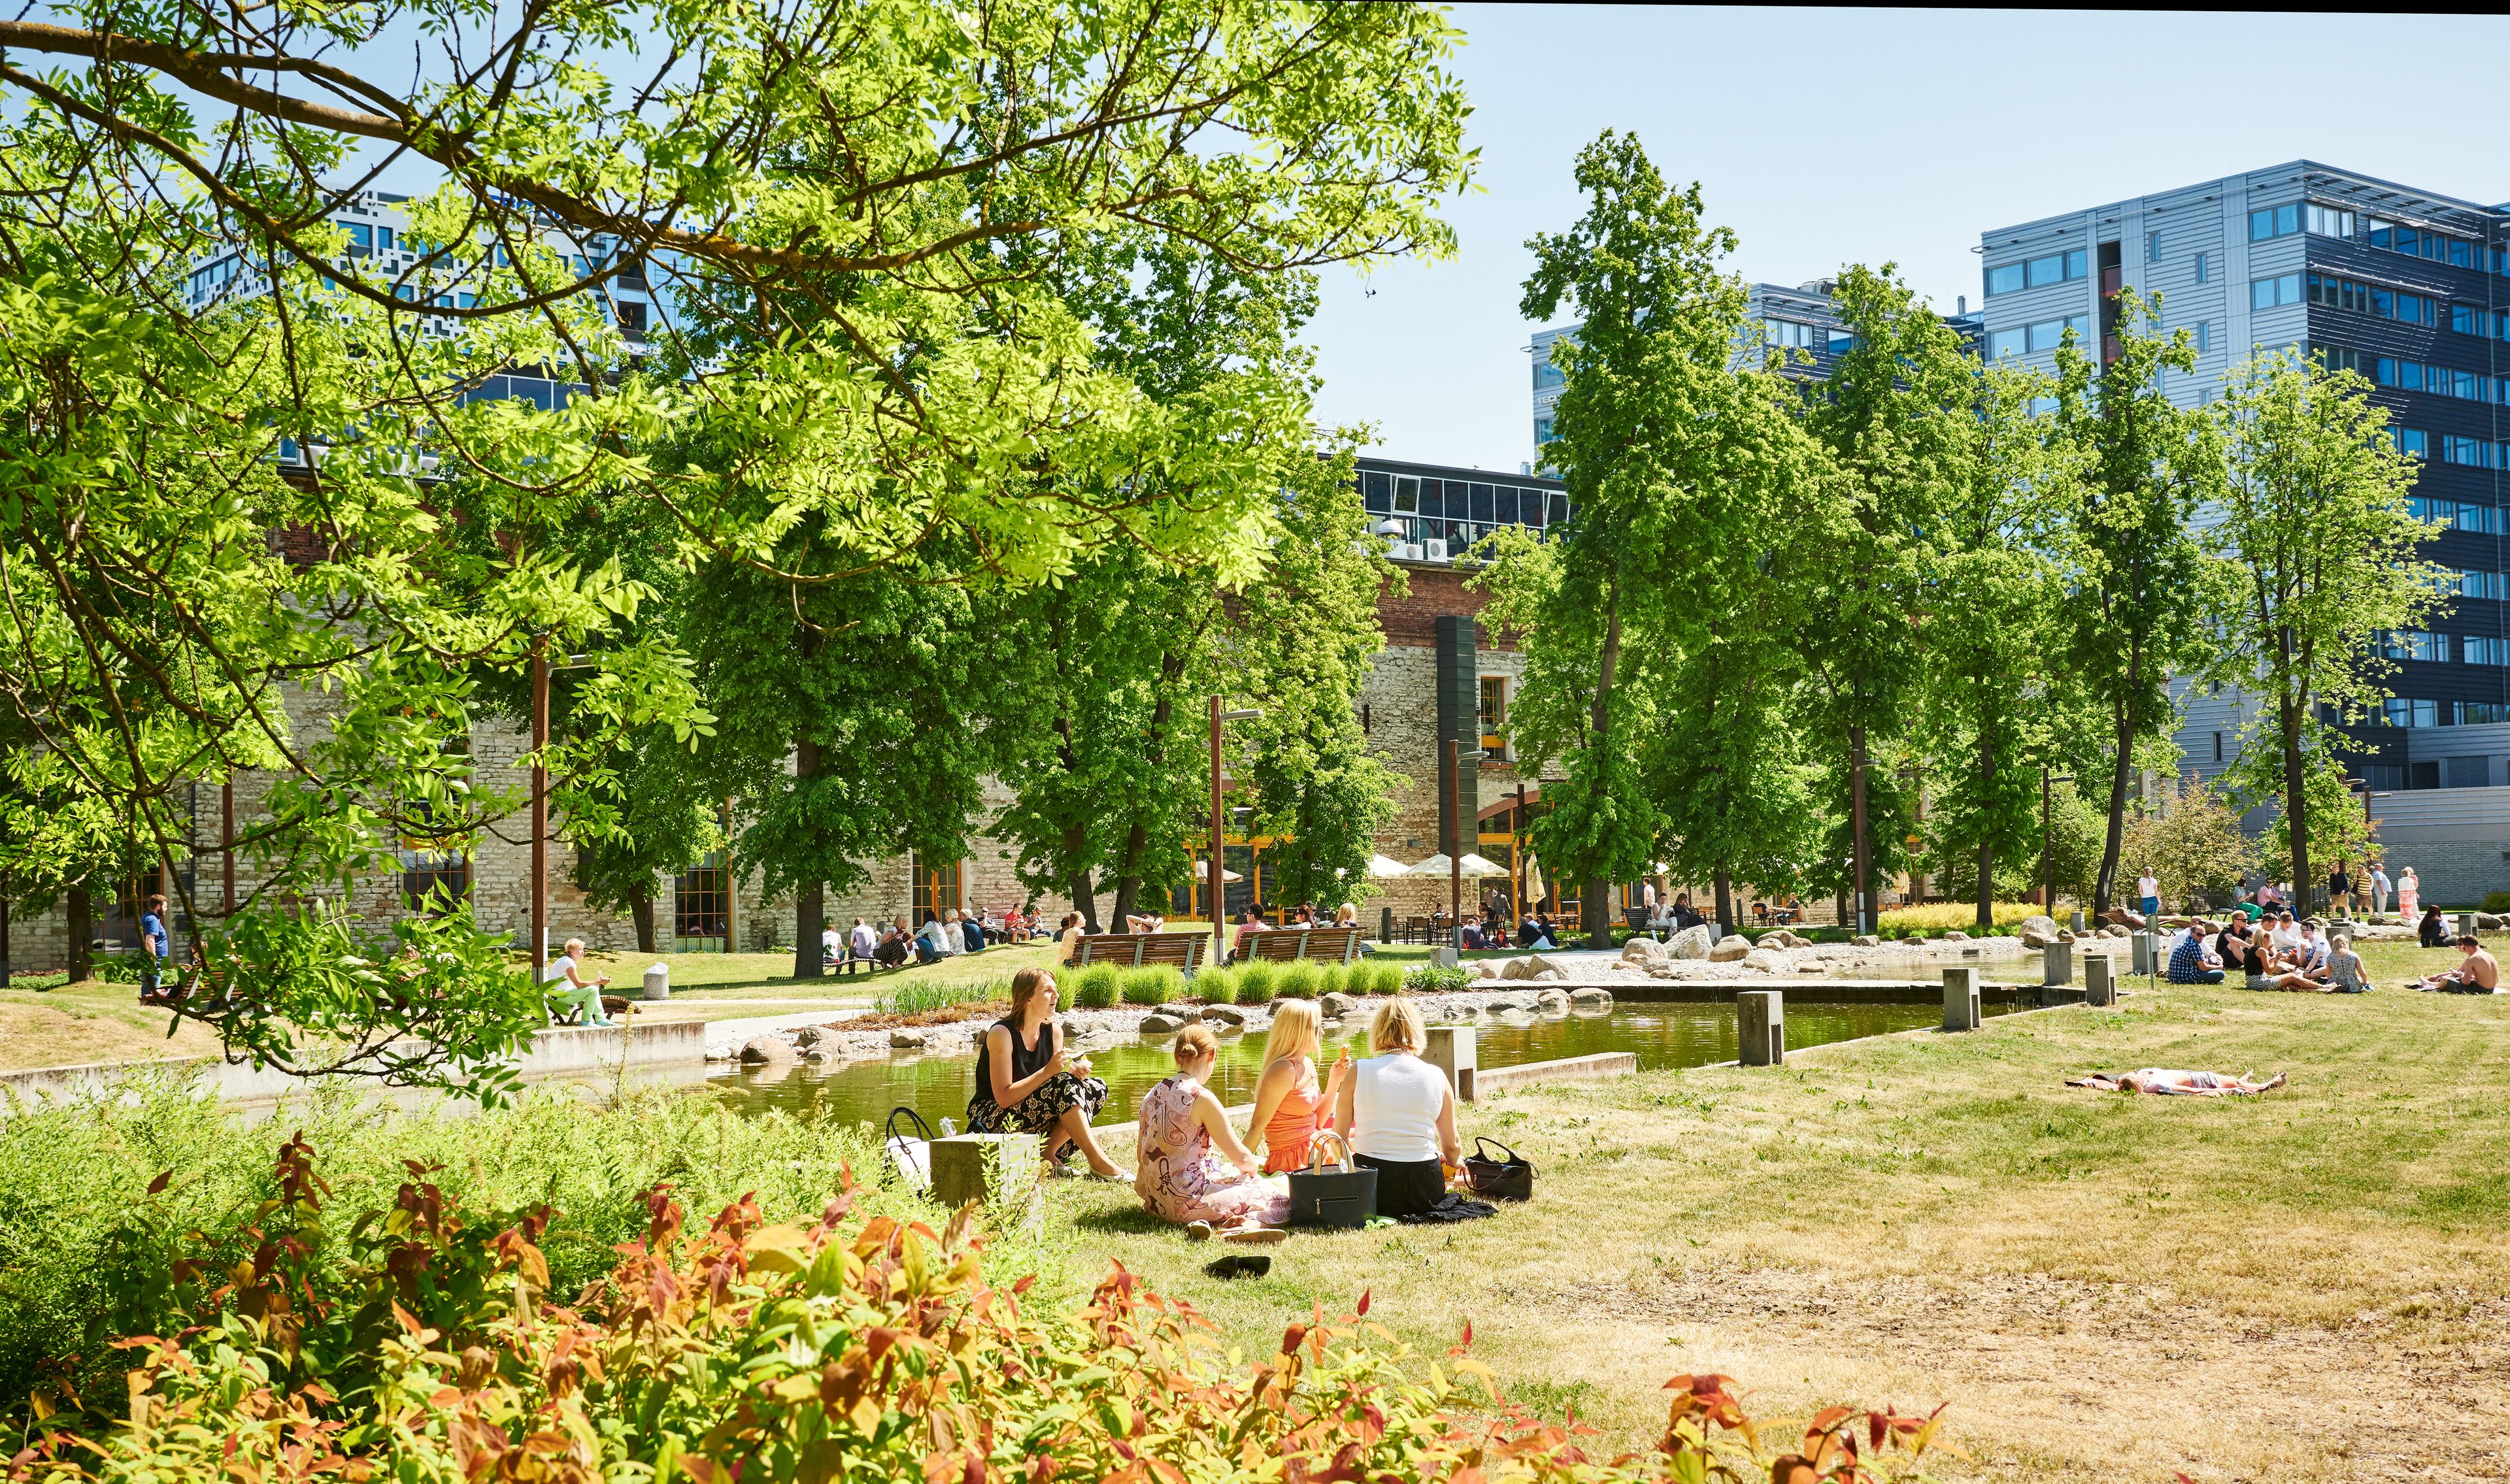 A photo of a park in sunlight. The grass is green, the trees are flourishing. People are sitting on the grass in small groups, conversing.